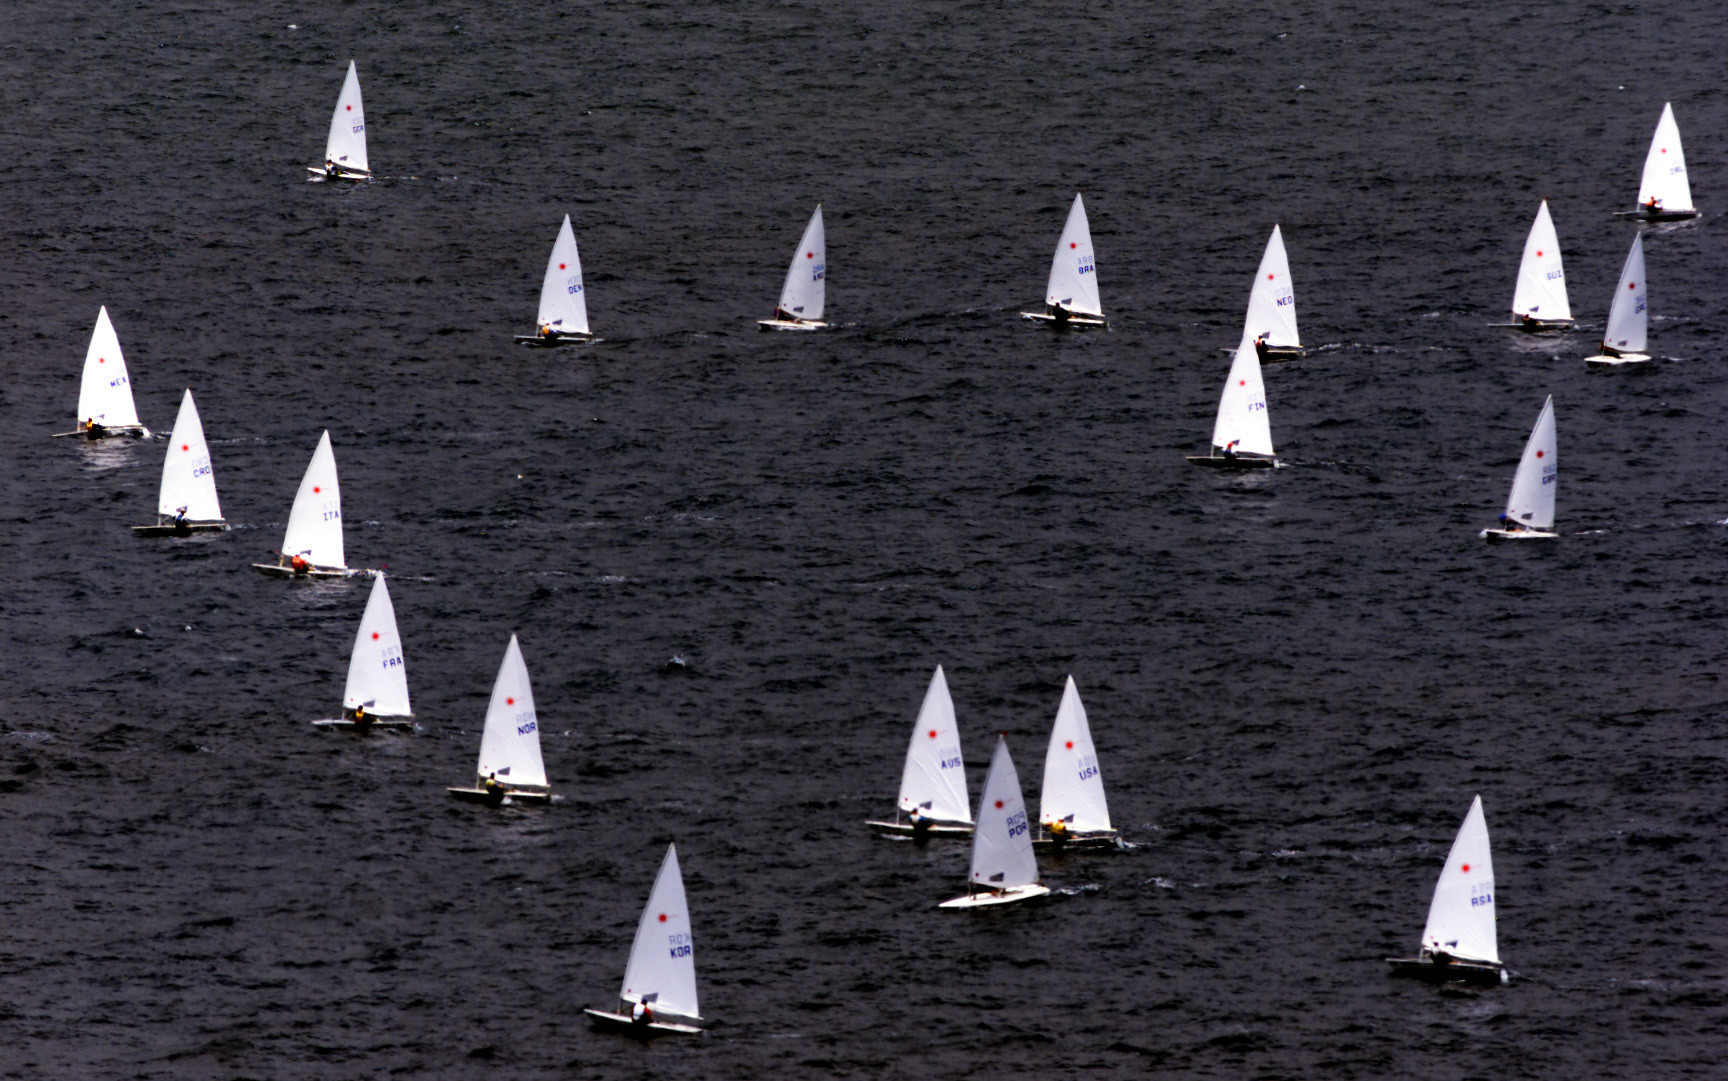 Total of 433 athletes travel to Oman for 50th Youth Sailing World Championships